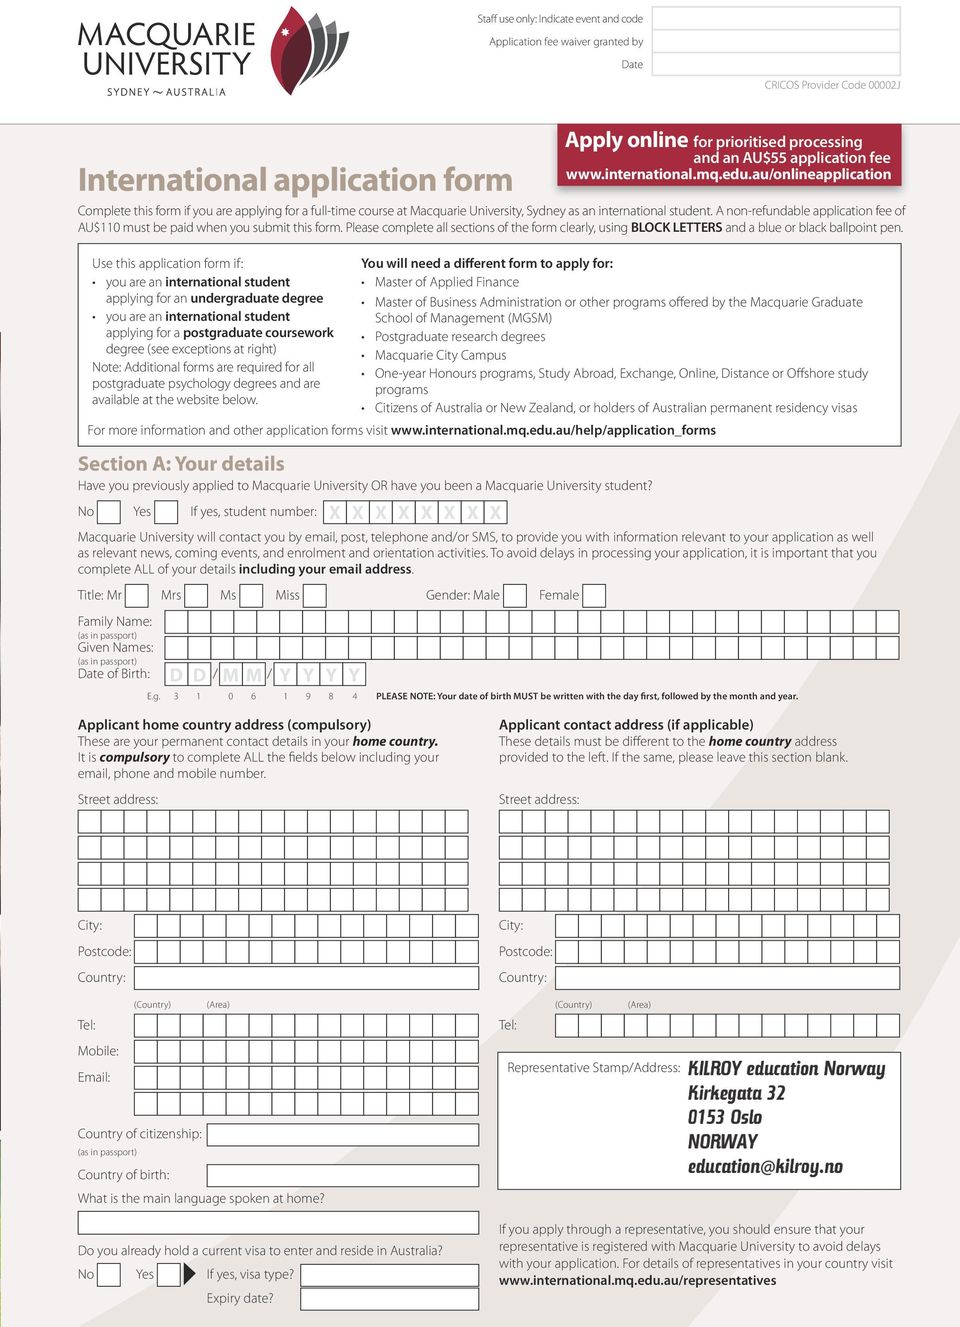 A non-refundable application fee of AU$110 must be paid when you submit this form. Please complete all sections of the form clearly, using BLOCK LETTERS and a blue or black ballpoint pen.